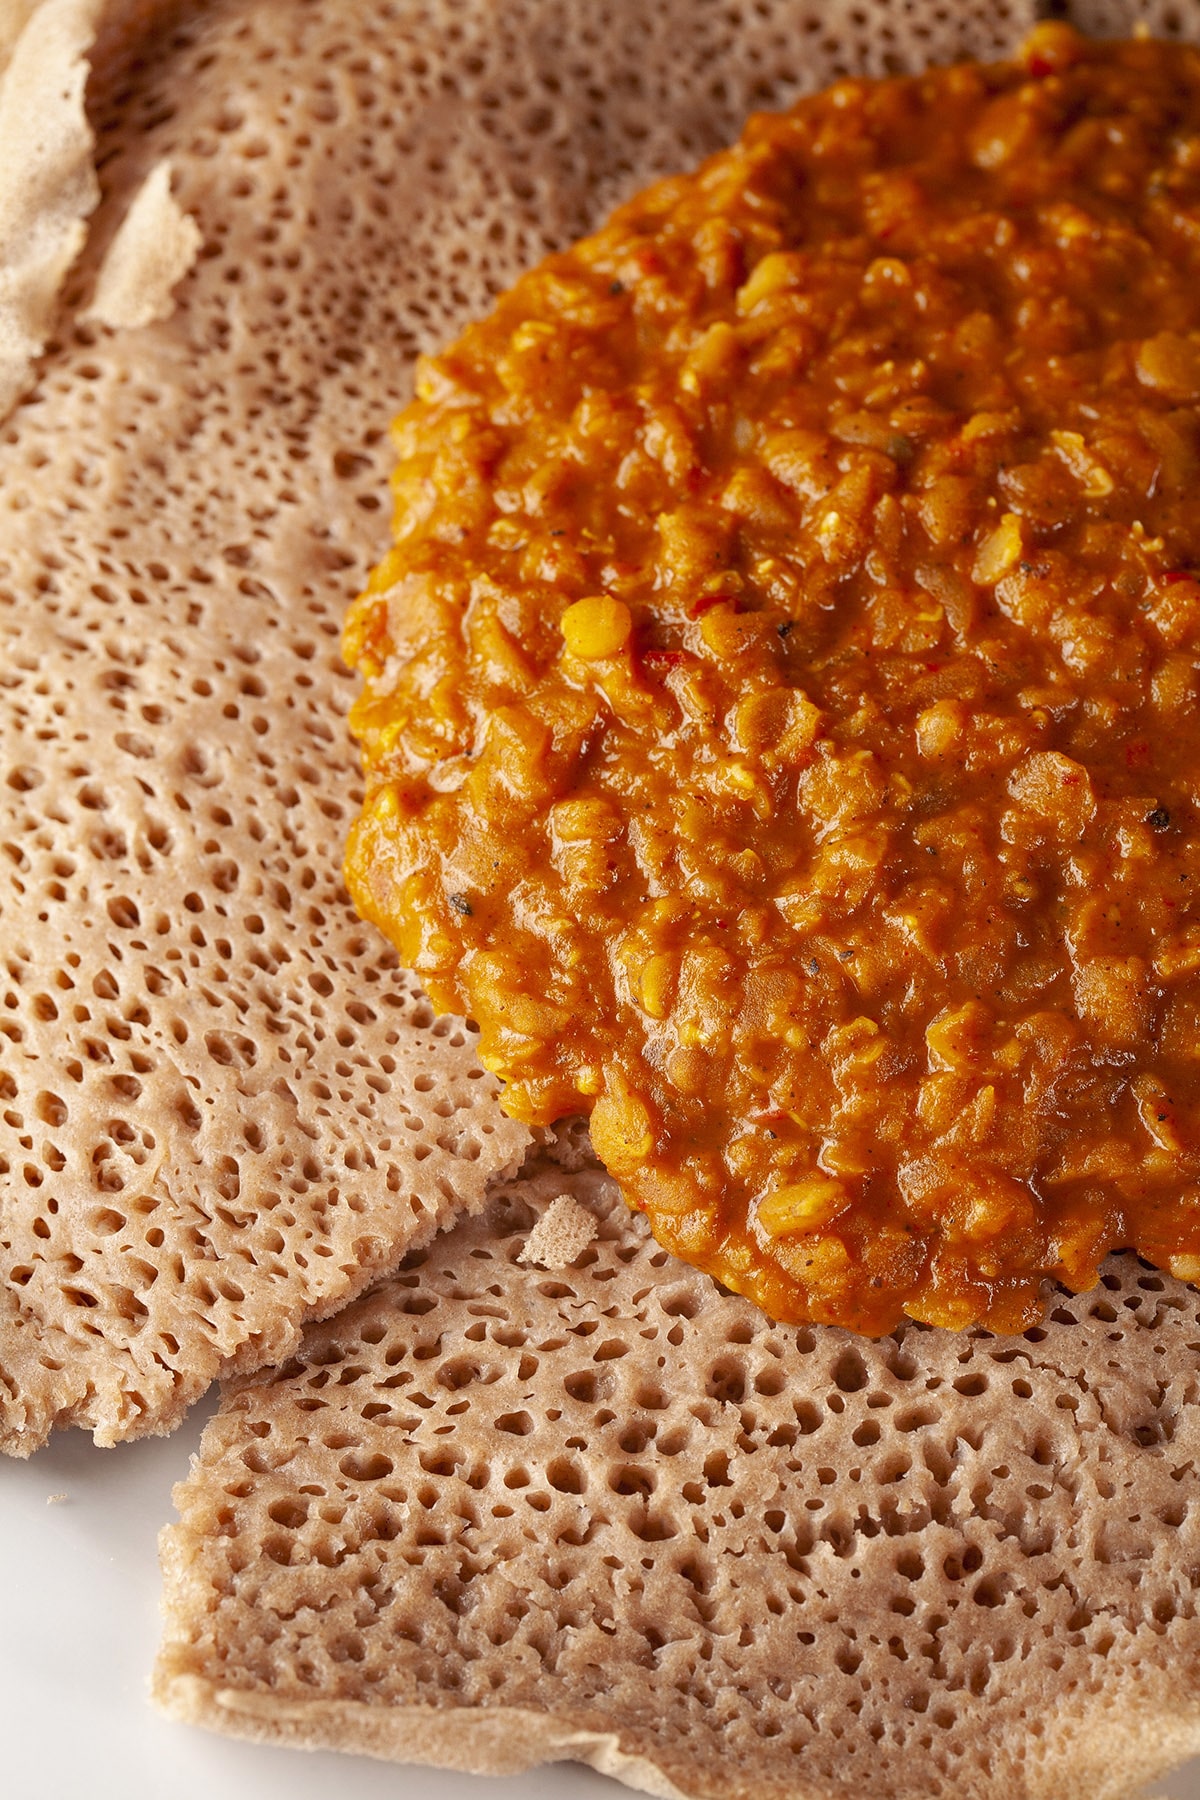 A generous portion of berbere lentils, on a pile of injera bread.